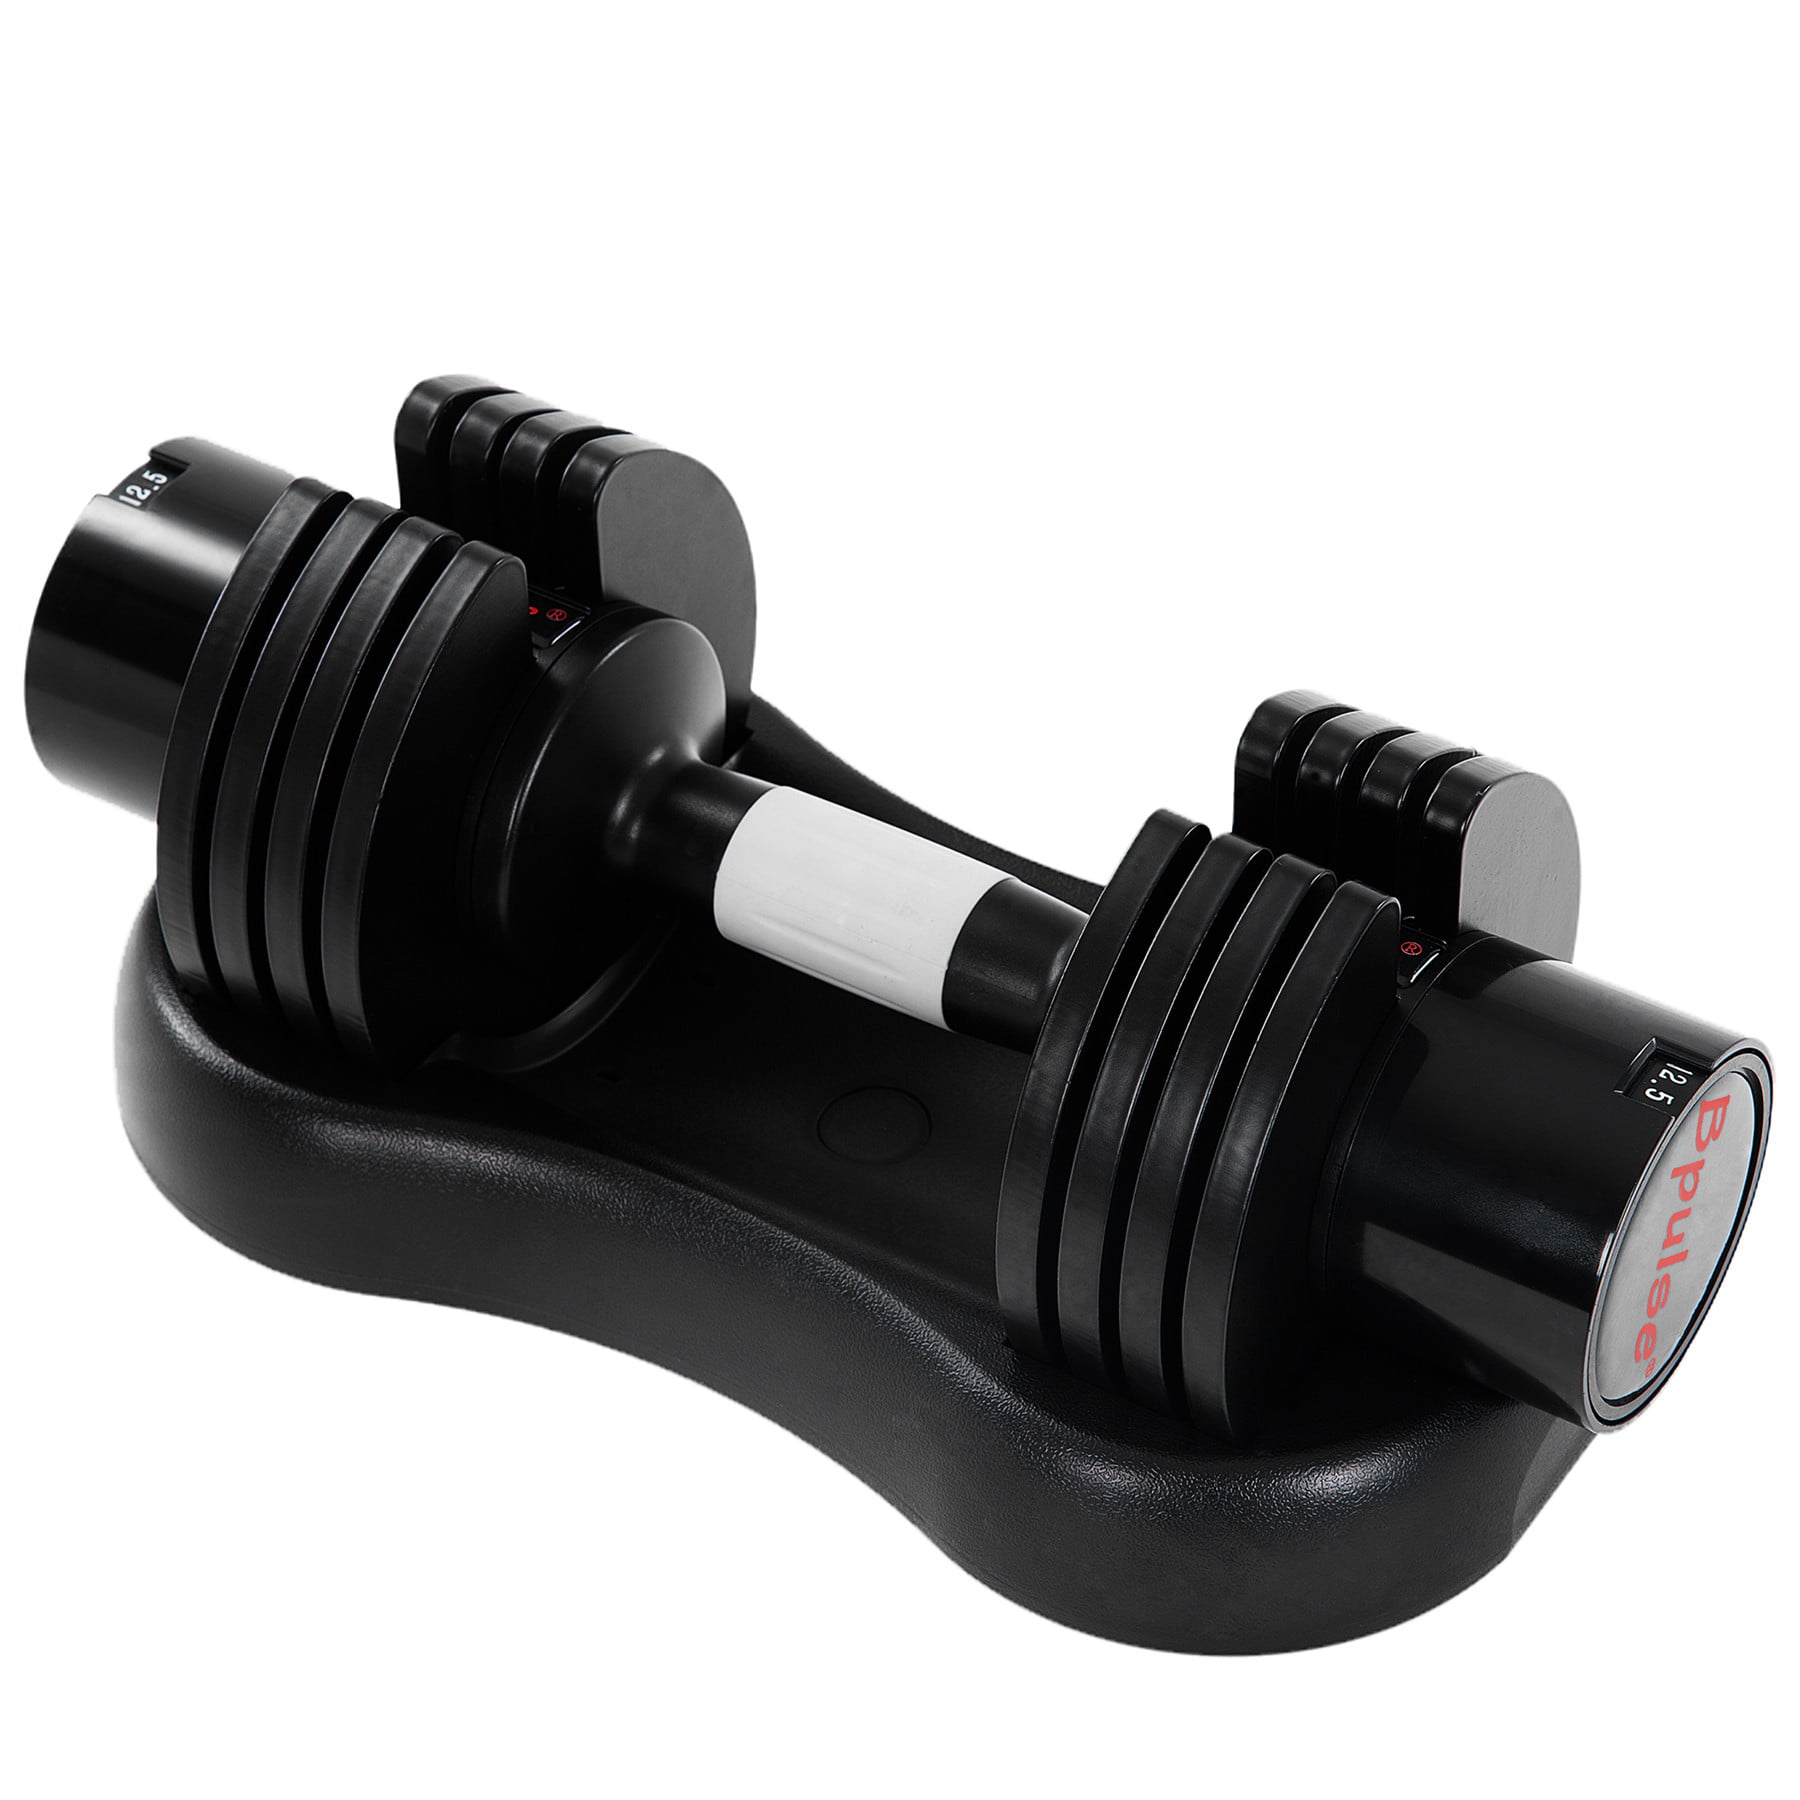 Single CDCASA Adjustable Dumbbell 25 lbs for Home Gym and Workout with Handle and Plates Free Weights for Men Women Selectorized Dumbbells for Fitness from 5 to 25 pounds